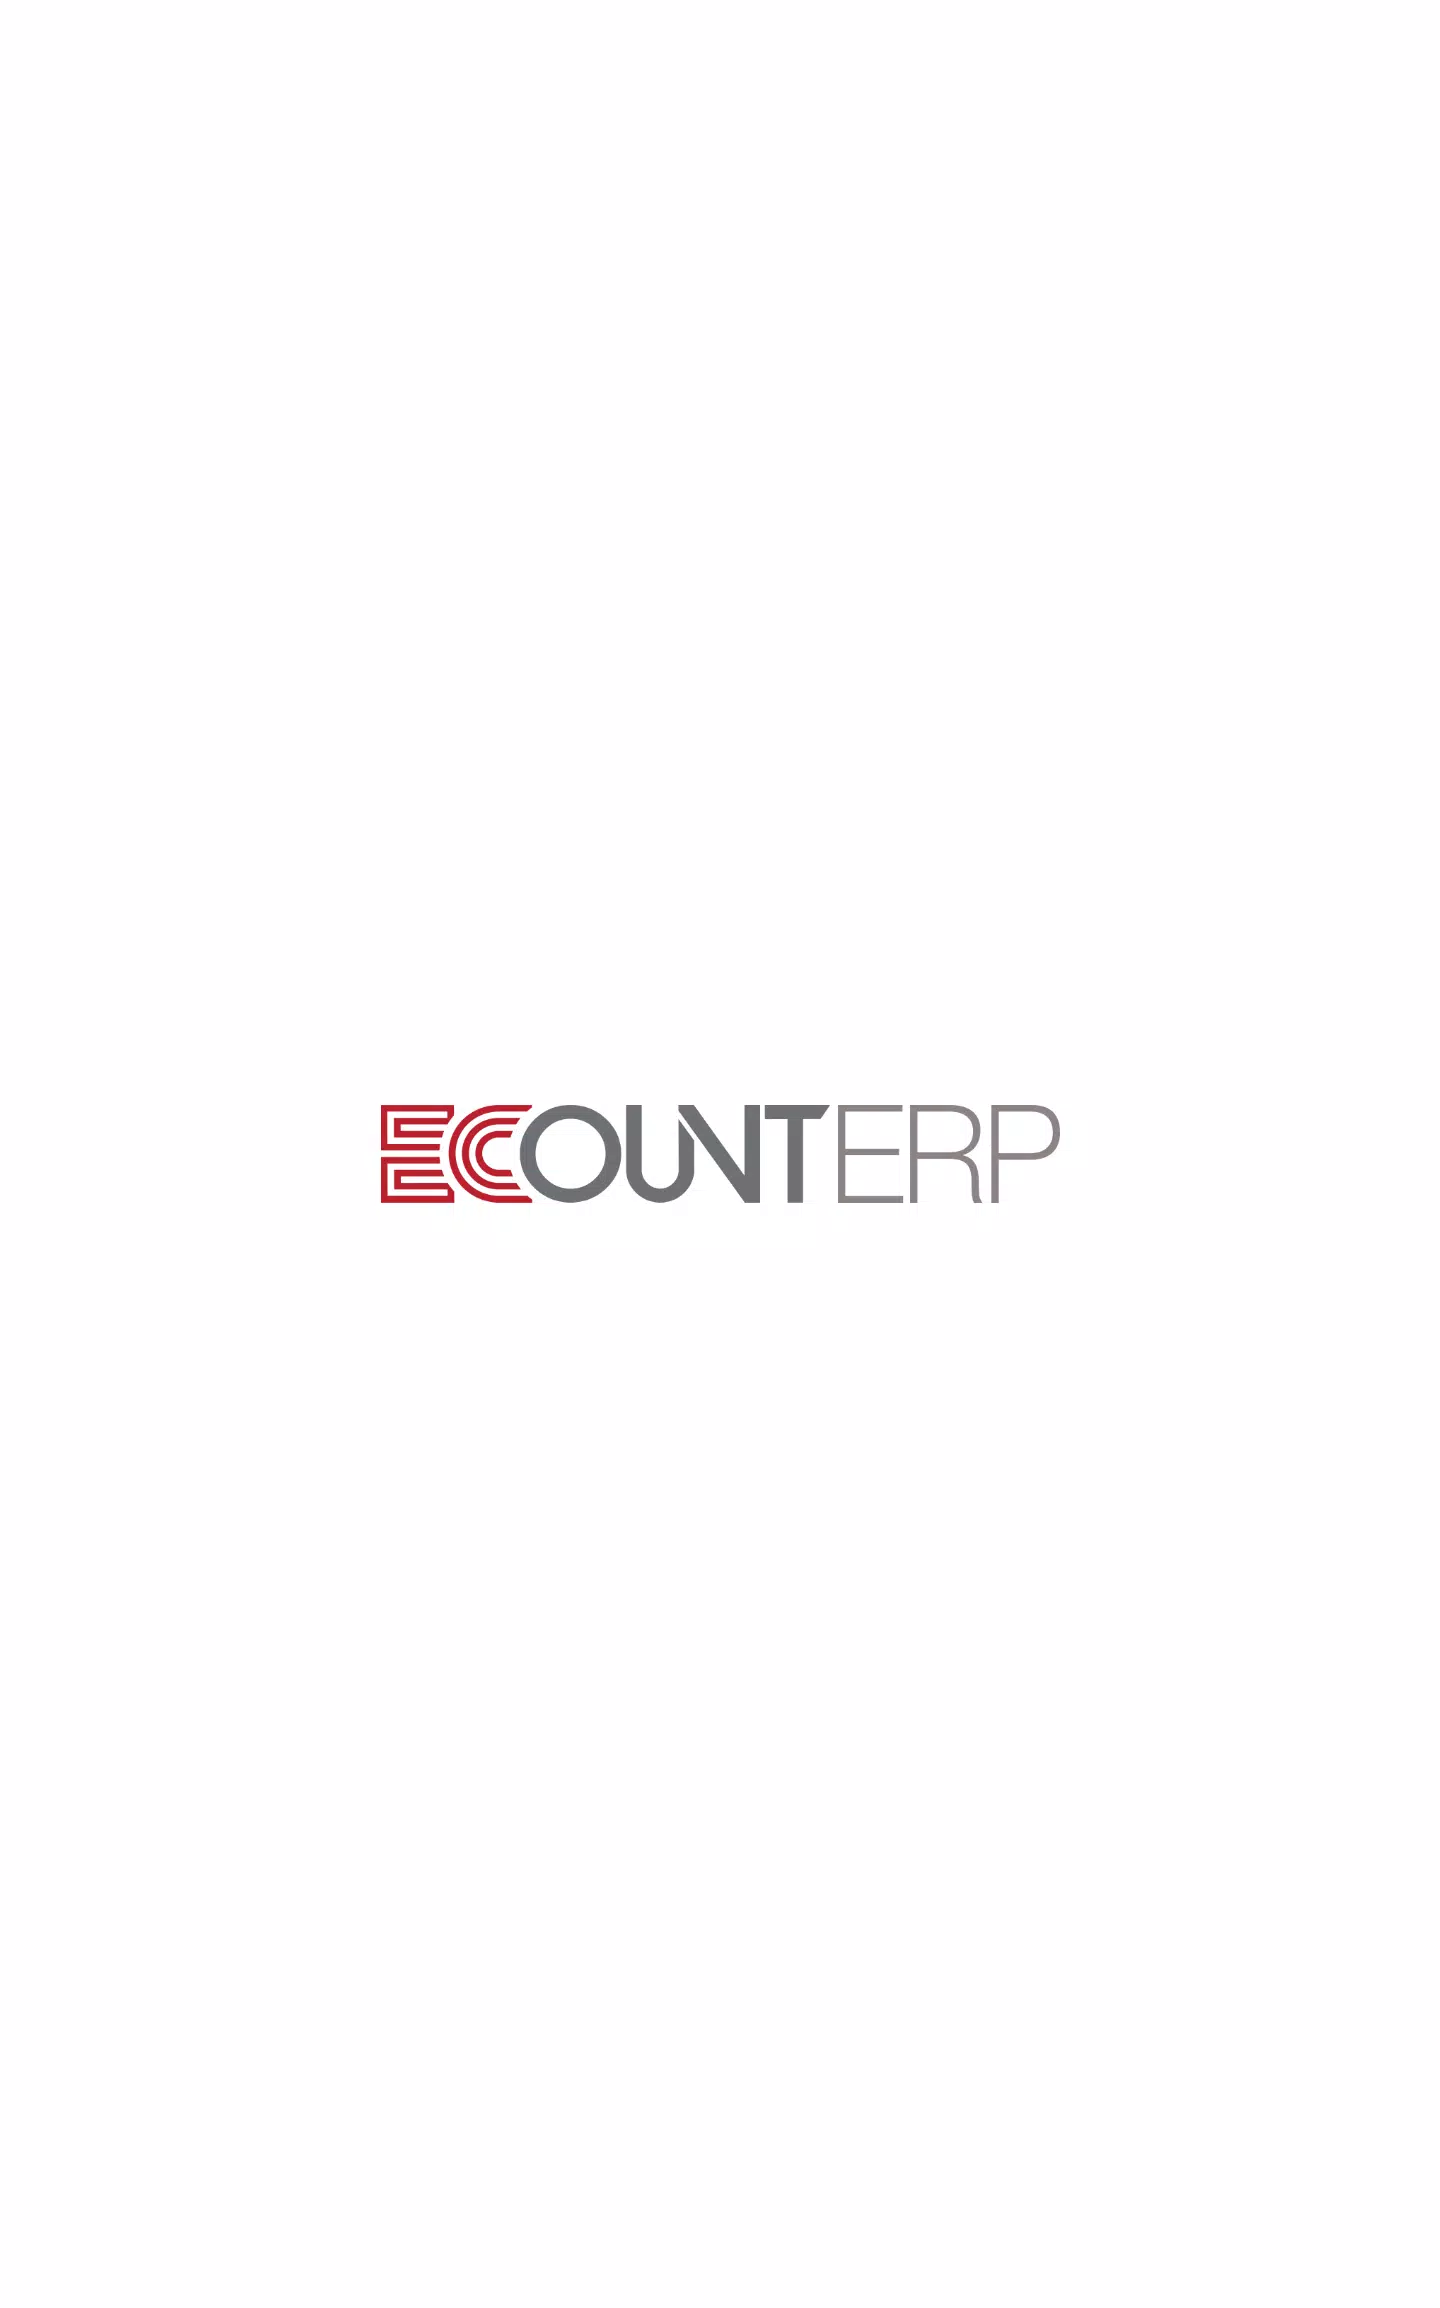 Tải Xuống Apk Ecount Erp Cho Android